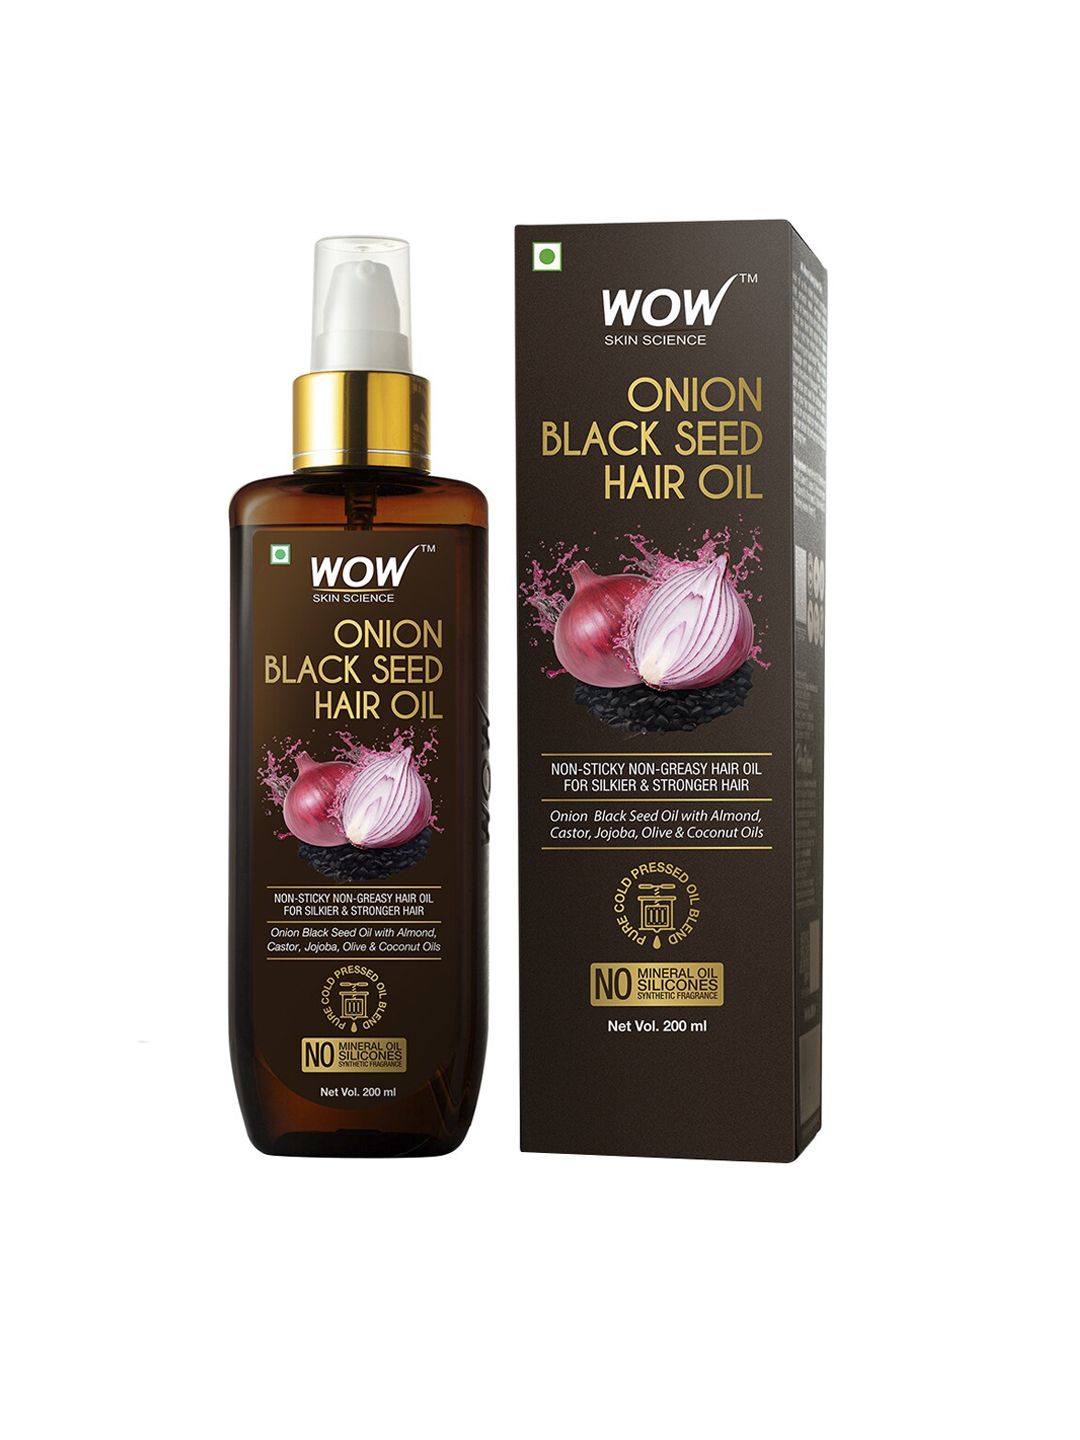 WOW SKIN SCIENCE Onion Hair Oil for Hair Growth with Black Seed Oil Extracts - 200 ml Price in India